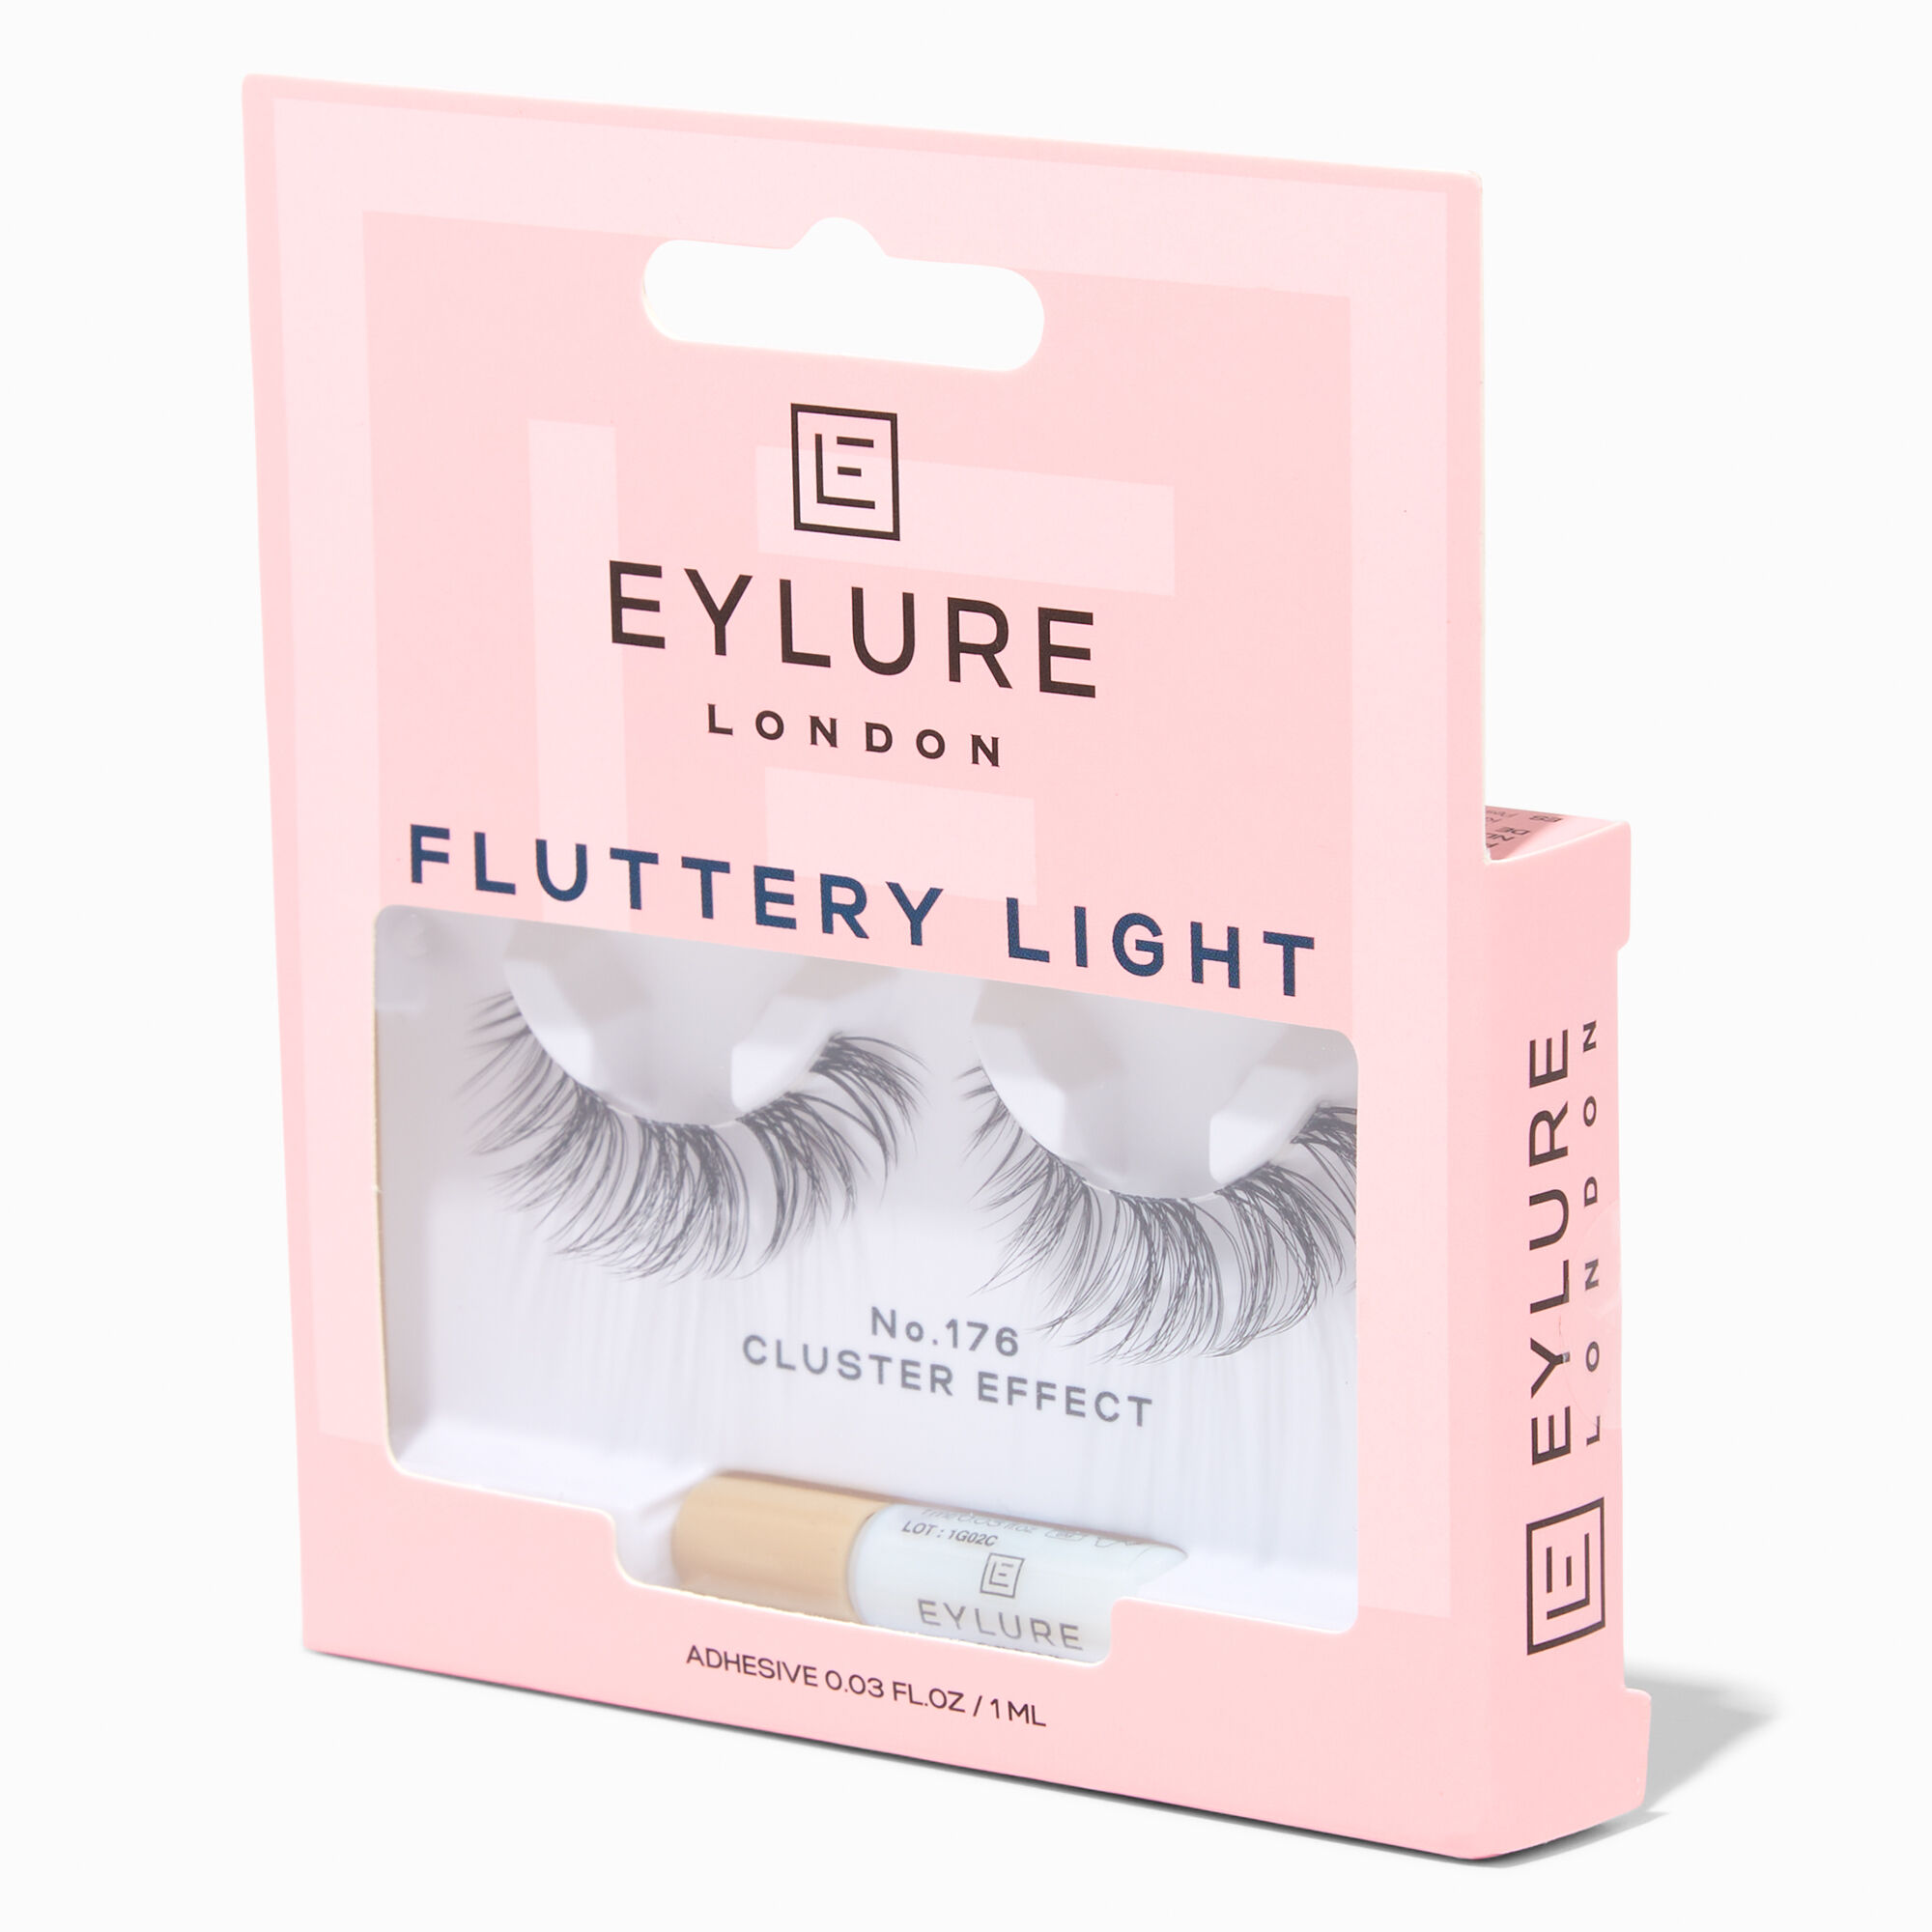 View Claires Eylure Fluttery Light Cluster Effect False Lashes No 176 information